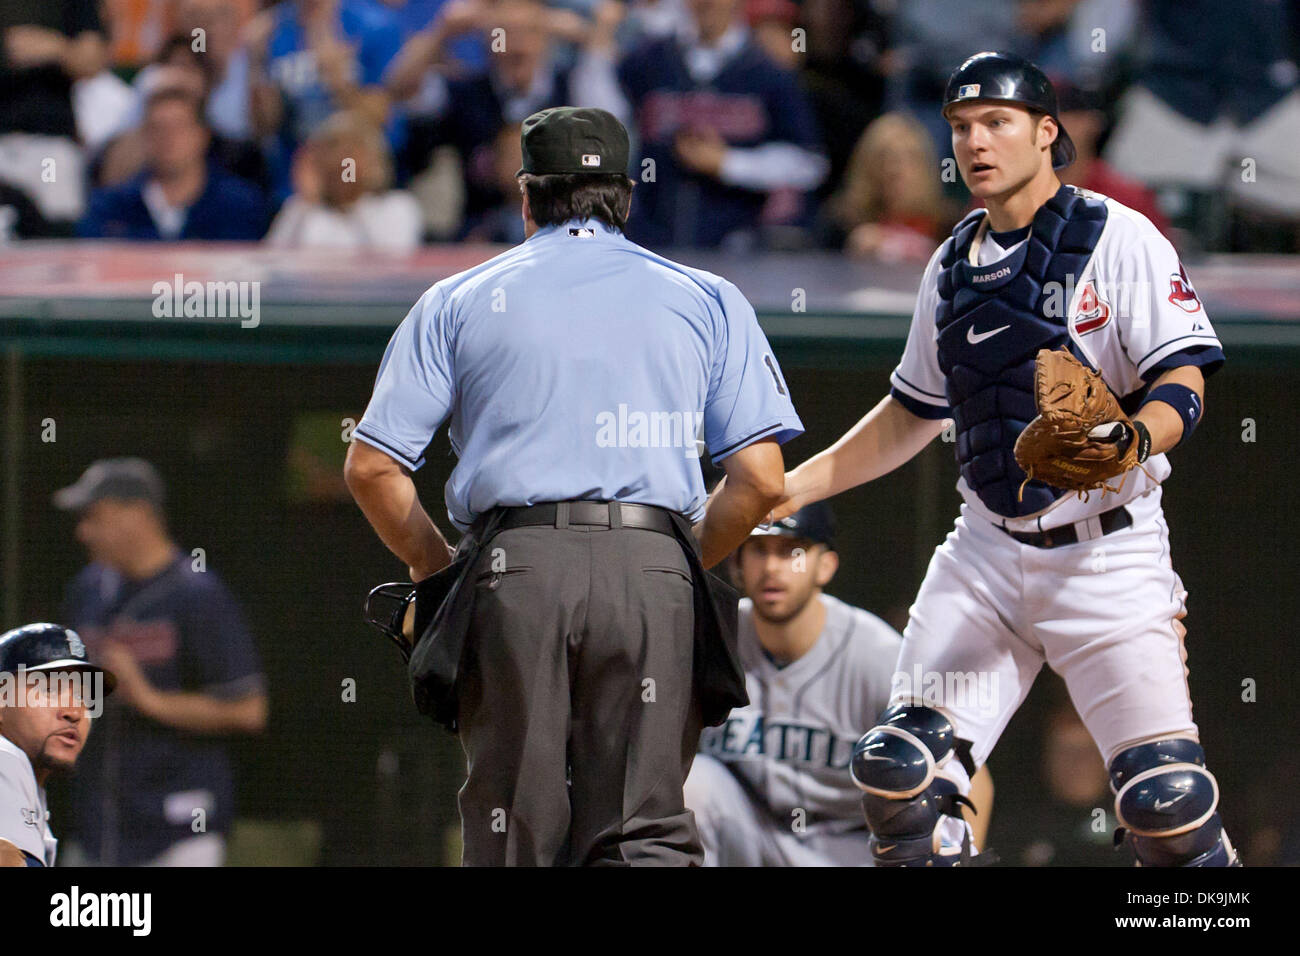 Aug. 22, 2011 - Cleveland, Ohio, U.S - Cleveland catcher Lou Marson (6) argues with with home plate umpire Phil Cuzzi (10) after Cuzzi called a runner safe at the plate during the ninth inning.  The Seattle Mariners defeated the Cleveland Indians 3-2 at Progressive Field in Cleveland, Ohio. (Credit Image: © Frank Jansky/Southcreek Global/ZUMAPRESS.com) Stock Photo